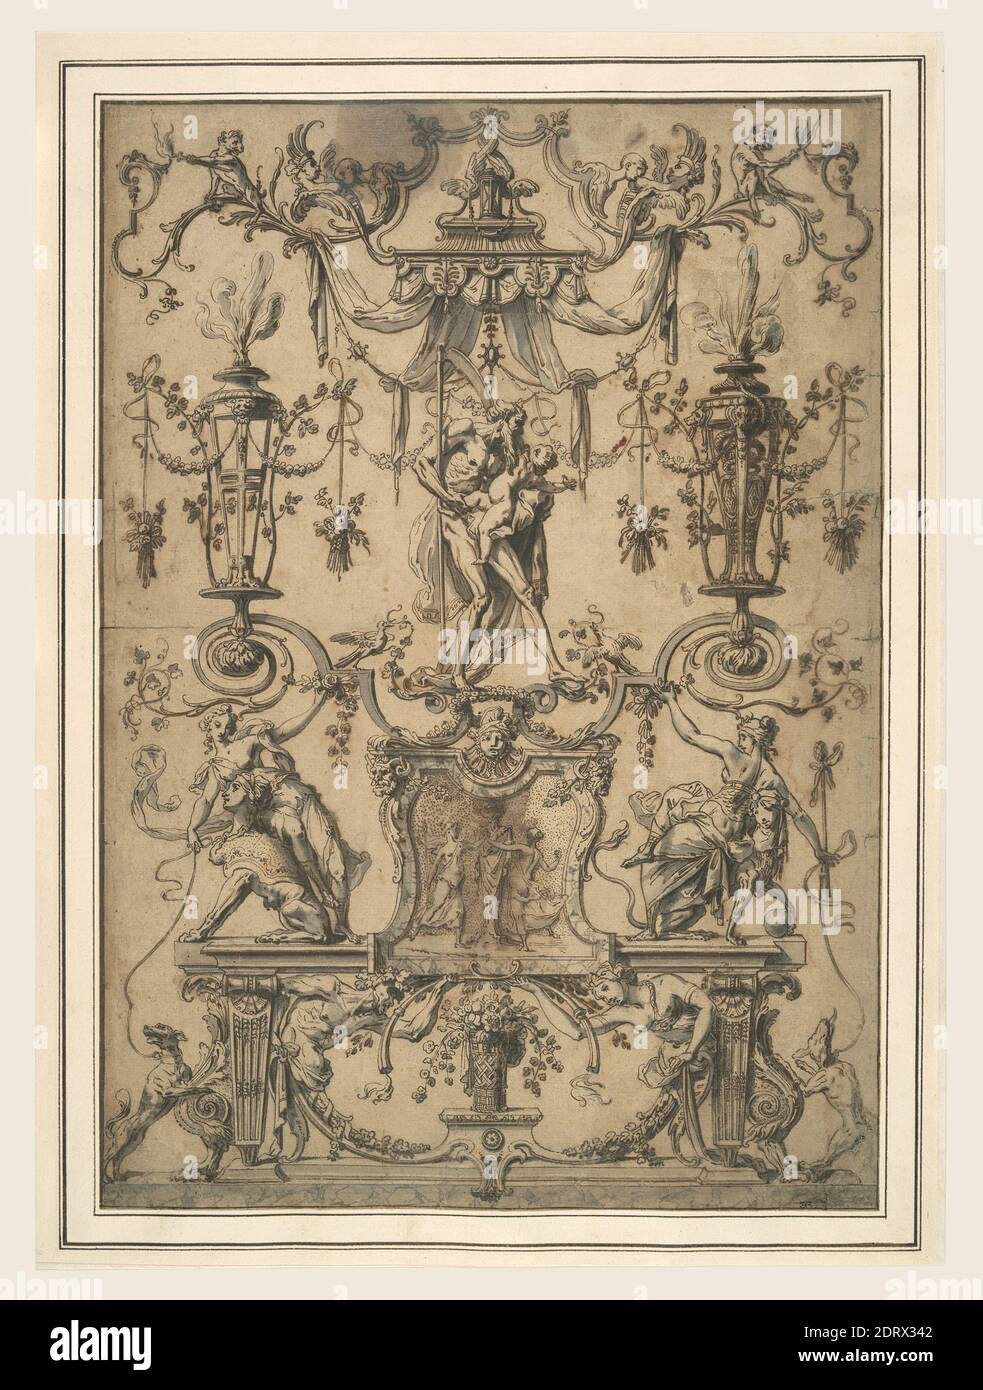 Artist: Gilles-Marie Oppenord, French, 1672–1742, Artist, formerly attributed to: Jean Bérain, French, 1640–1711, Ornamental panel with Father Time, ca. 1700, Pen and brown ink and gray wash, sheet: 41 × 28.7 cm (16 1/8 × 11 5/16 in.), The son of a craftsman who worked for Louis XIV, Gilles-Marie Oppenord studied in Rome for seven years, drawing ancient monuments as well as buildings by the modern masters Gian Lorenzo Bernini and Francesco Borromini. Back in Paris, Oppenord eventually became chief architect for the Duke of Orléans. Stock Photo